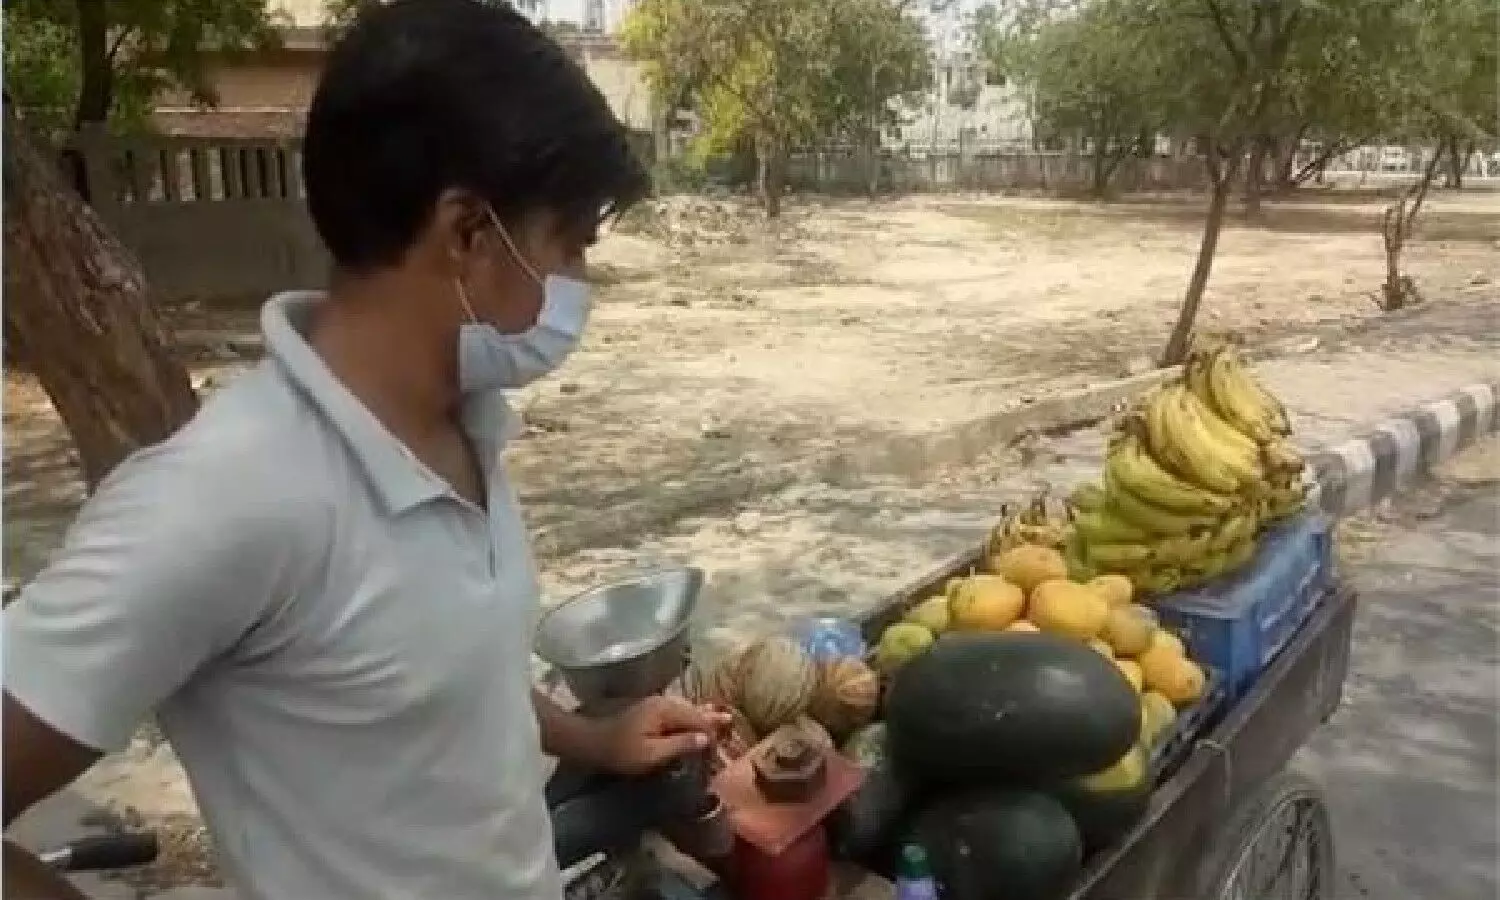 In Jabalpur, Madhya Pradesh, a man selling fruit by hawking on the roadside attacked a policeman with a fatal attack.